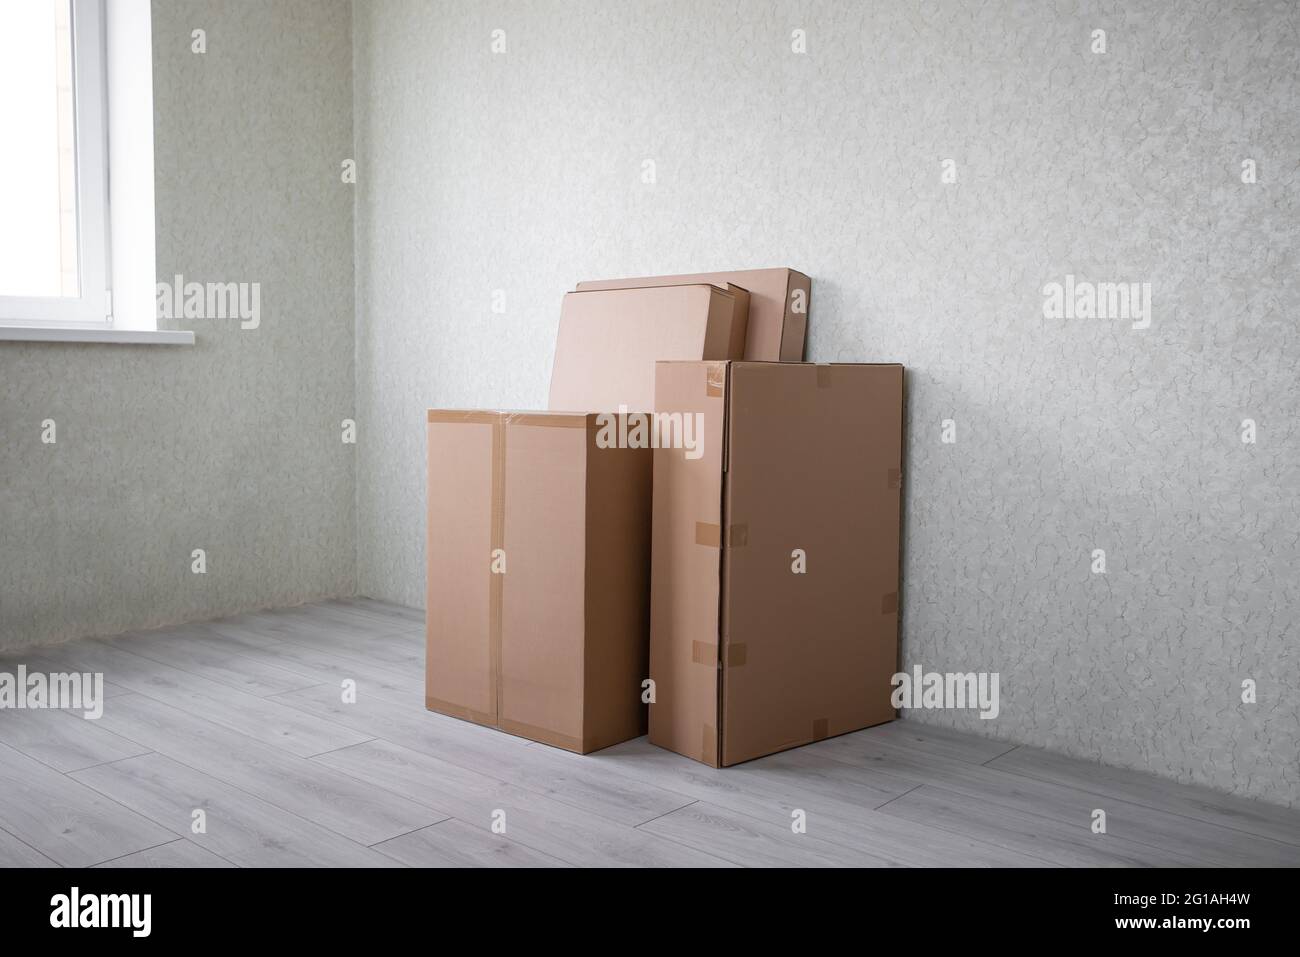 Brand  new selection of furniture in cardboard boxes just arrived in new home Stock Photo